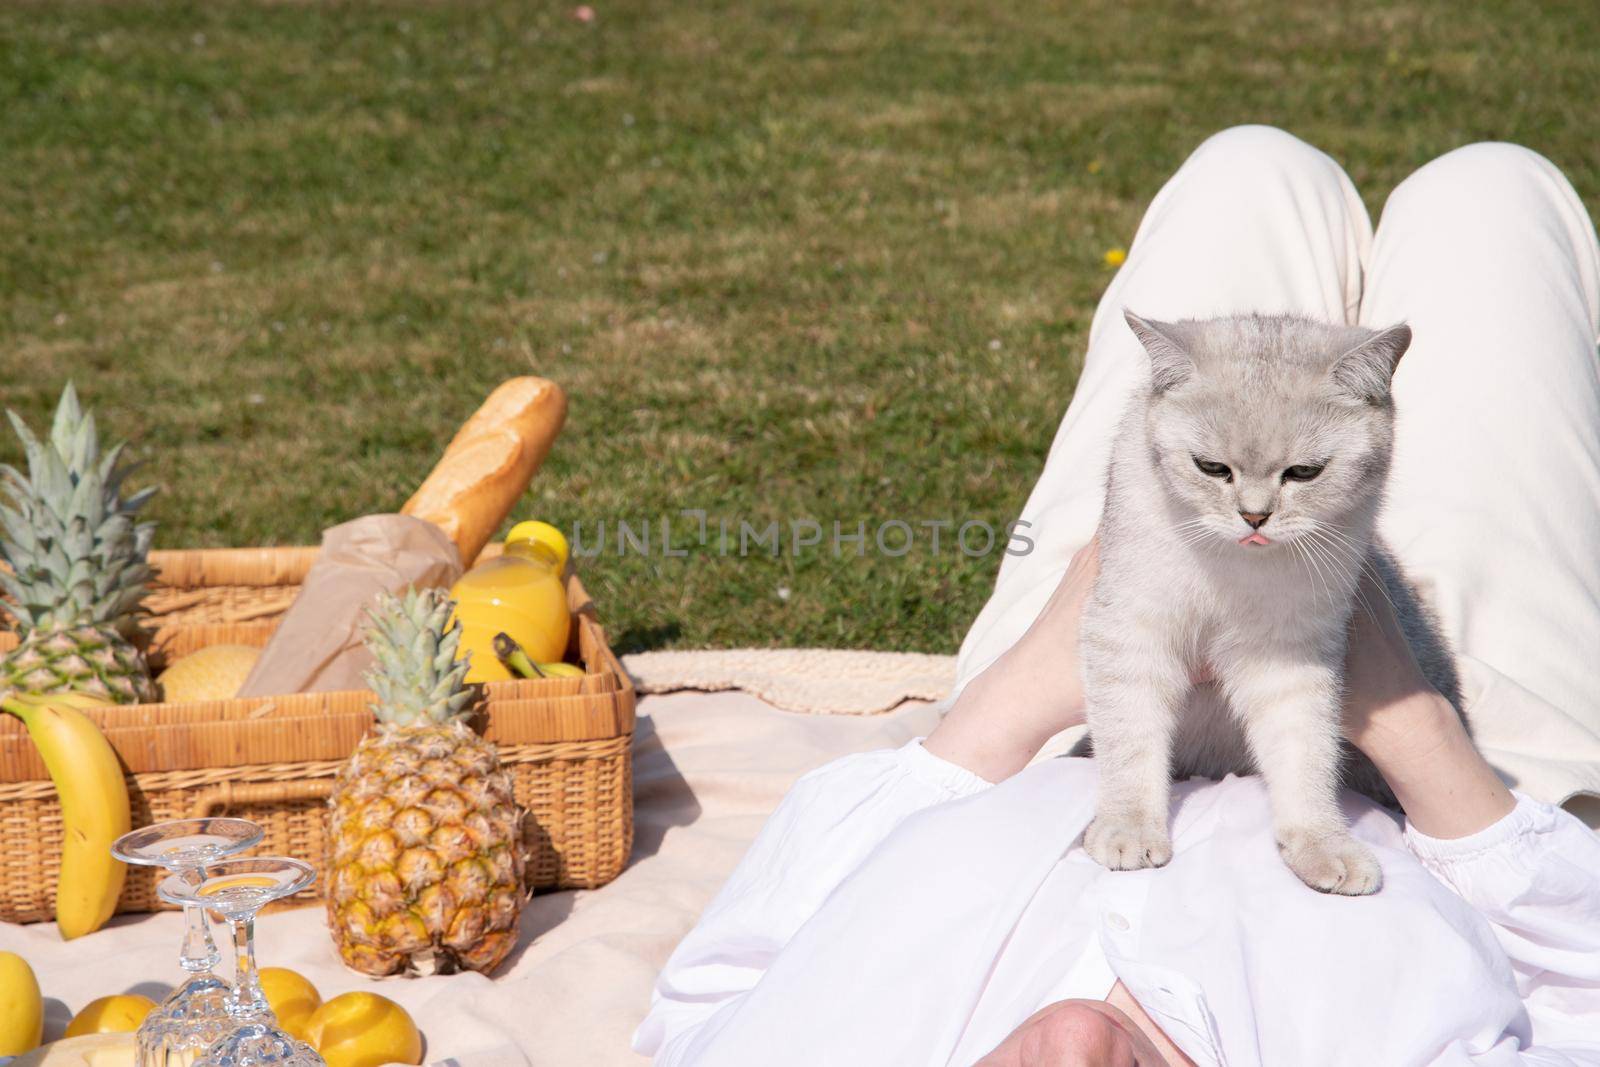 a young woman in a white shirt is resting on a picnic with her pet kitten, rest from worries and household chores, parks and recreation areas,. High quality photo